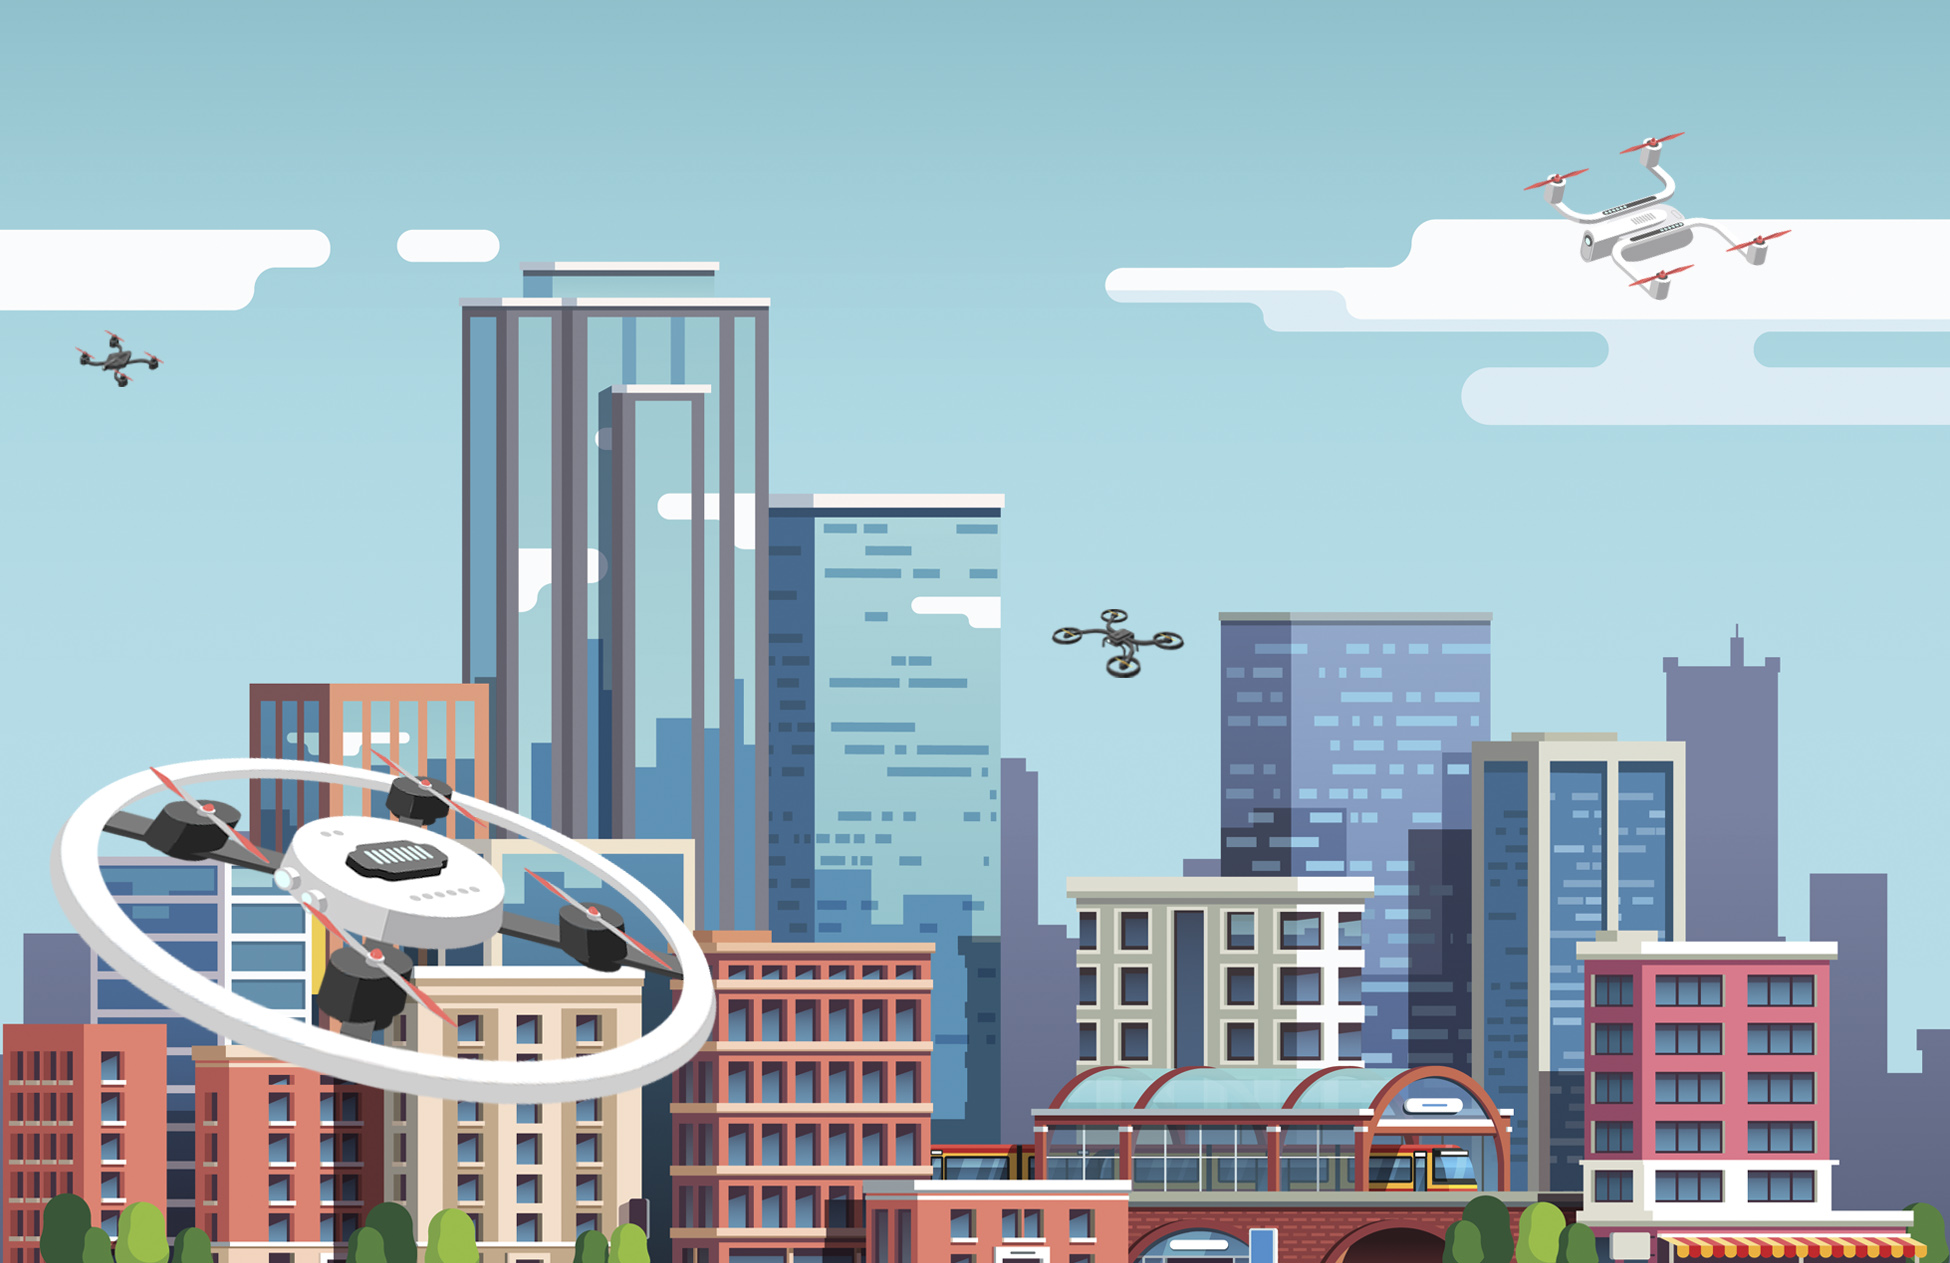 This illustration depicts multiple small drones flying in an urban environment